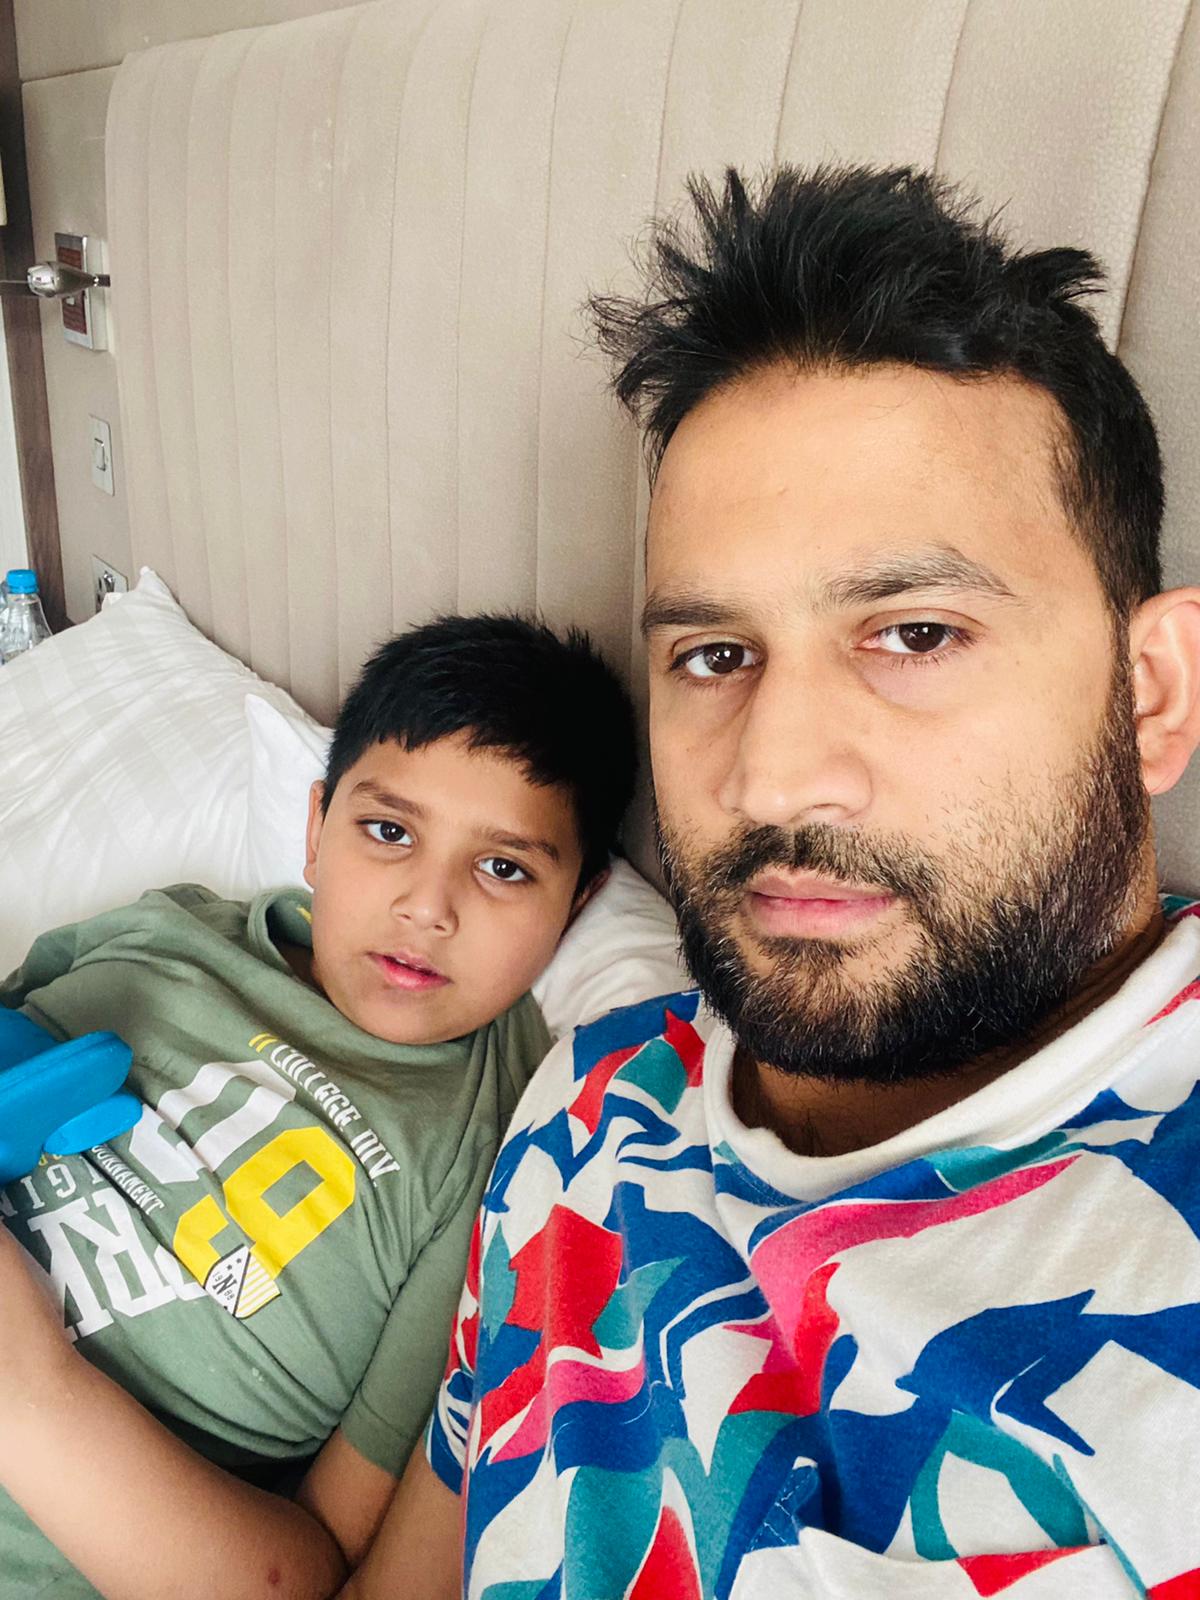 Mr Azam and his son, nine-year-old Ahmed, in their hotel room at the Crown Plaza